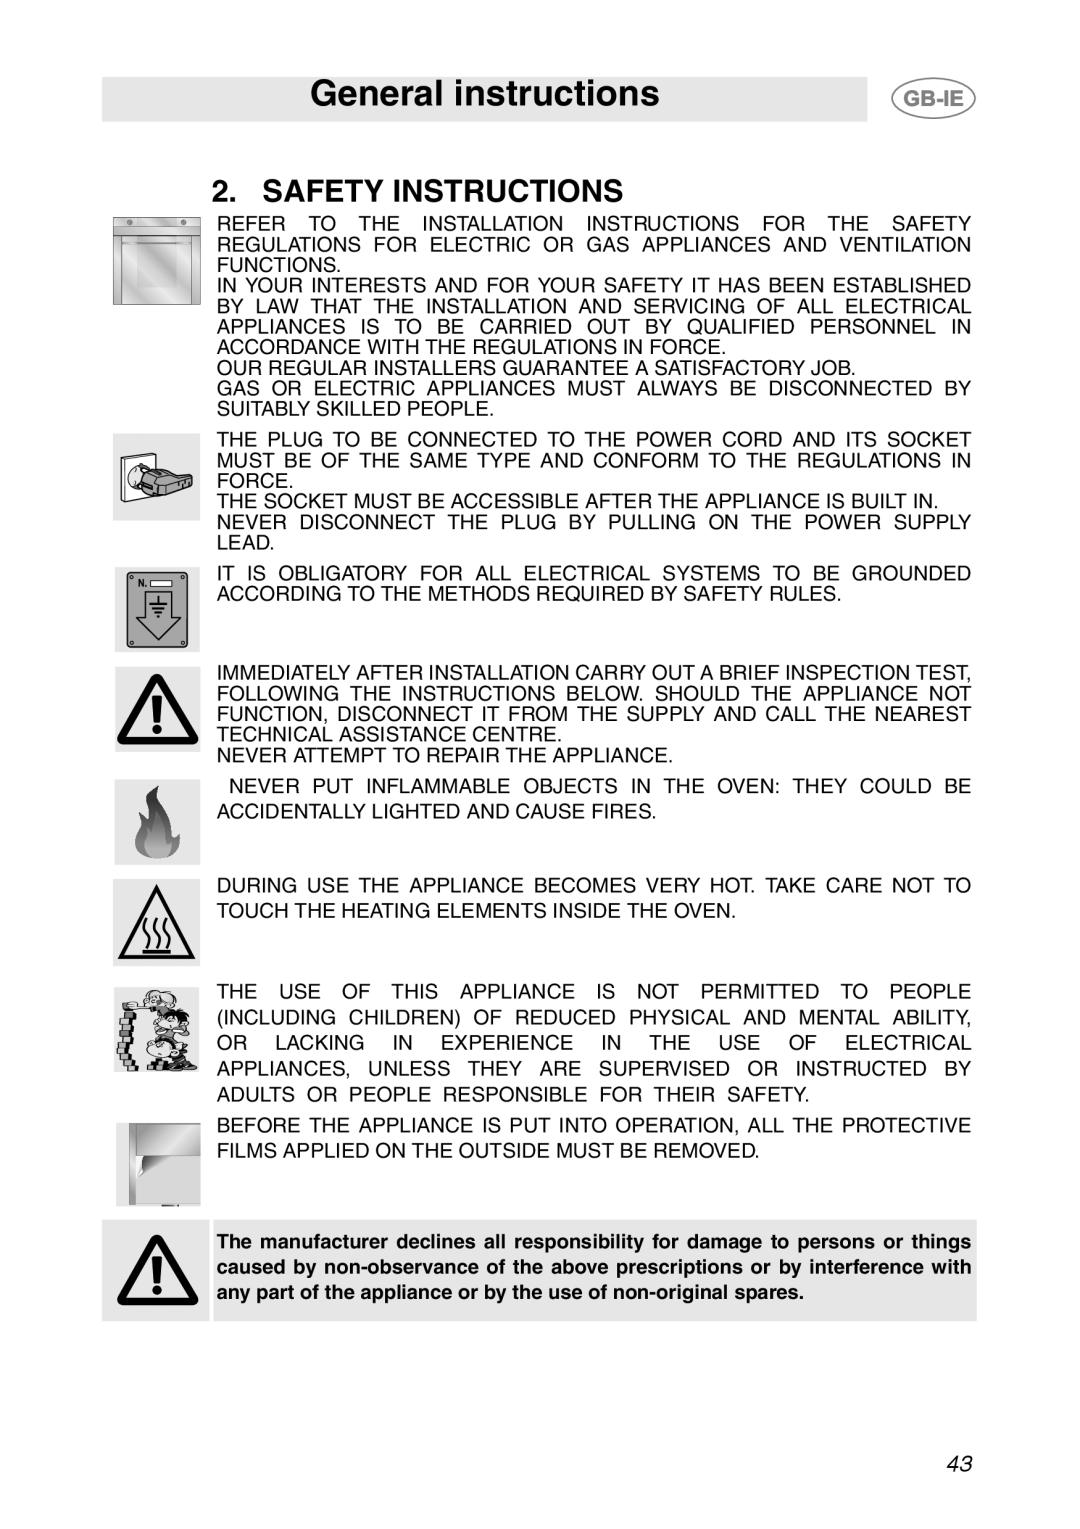 Smeg SCP111NE1, SCP111EB1, SCP111-1 manual Safety Instructions, General instructions 